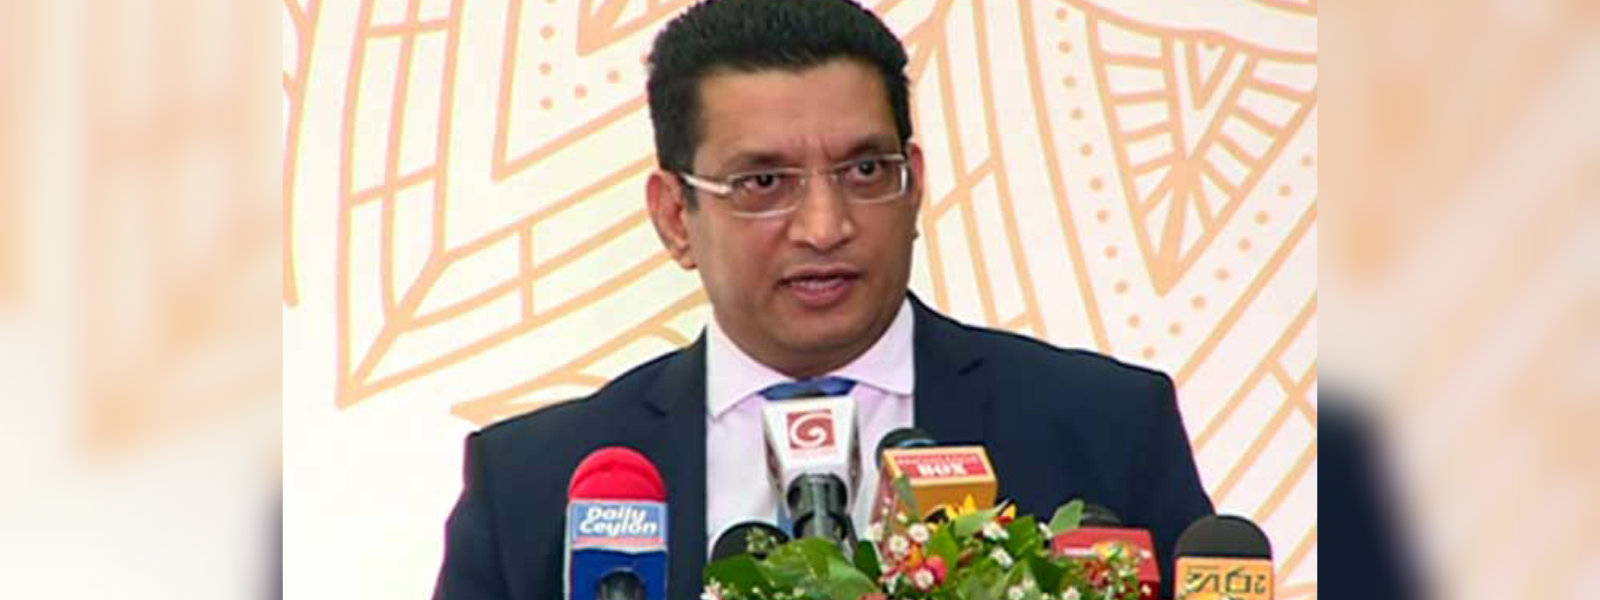 Foreigners can be part of Port City Commission : Sabry